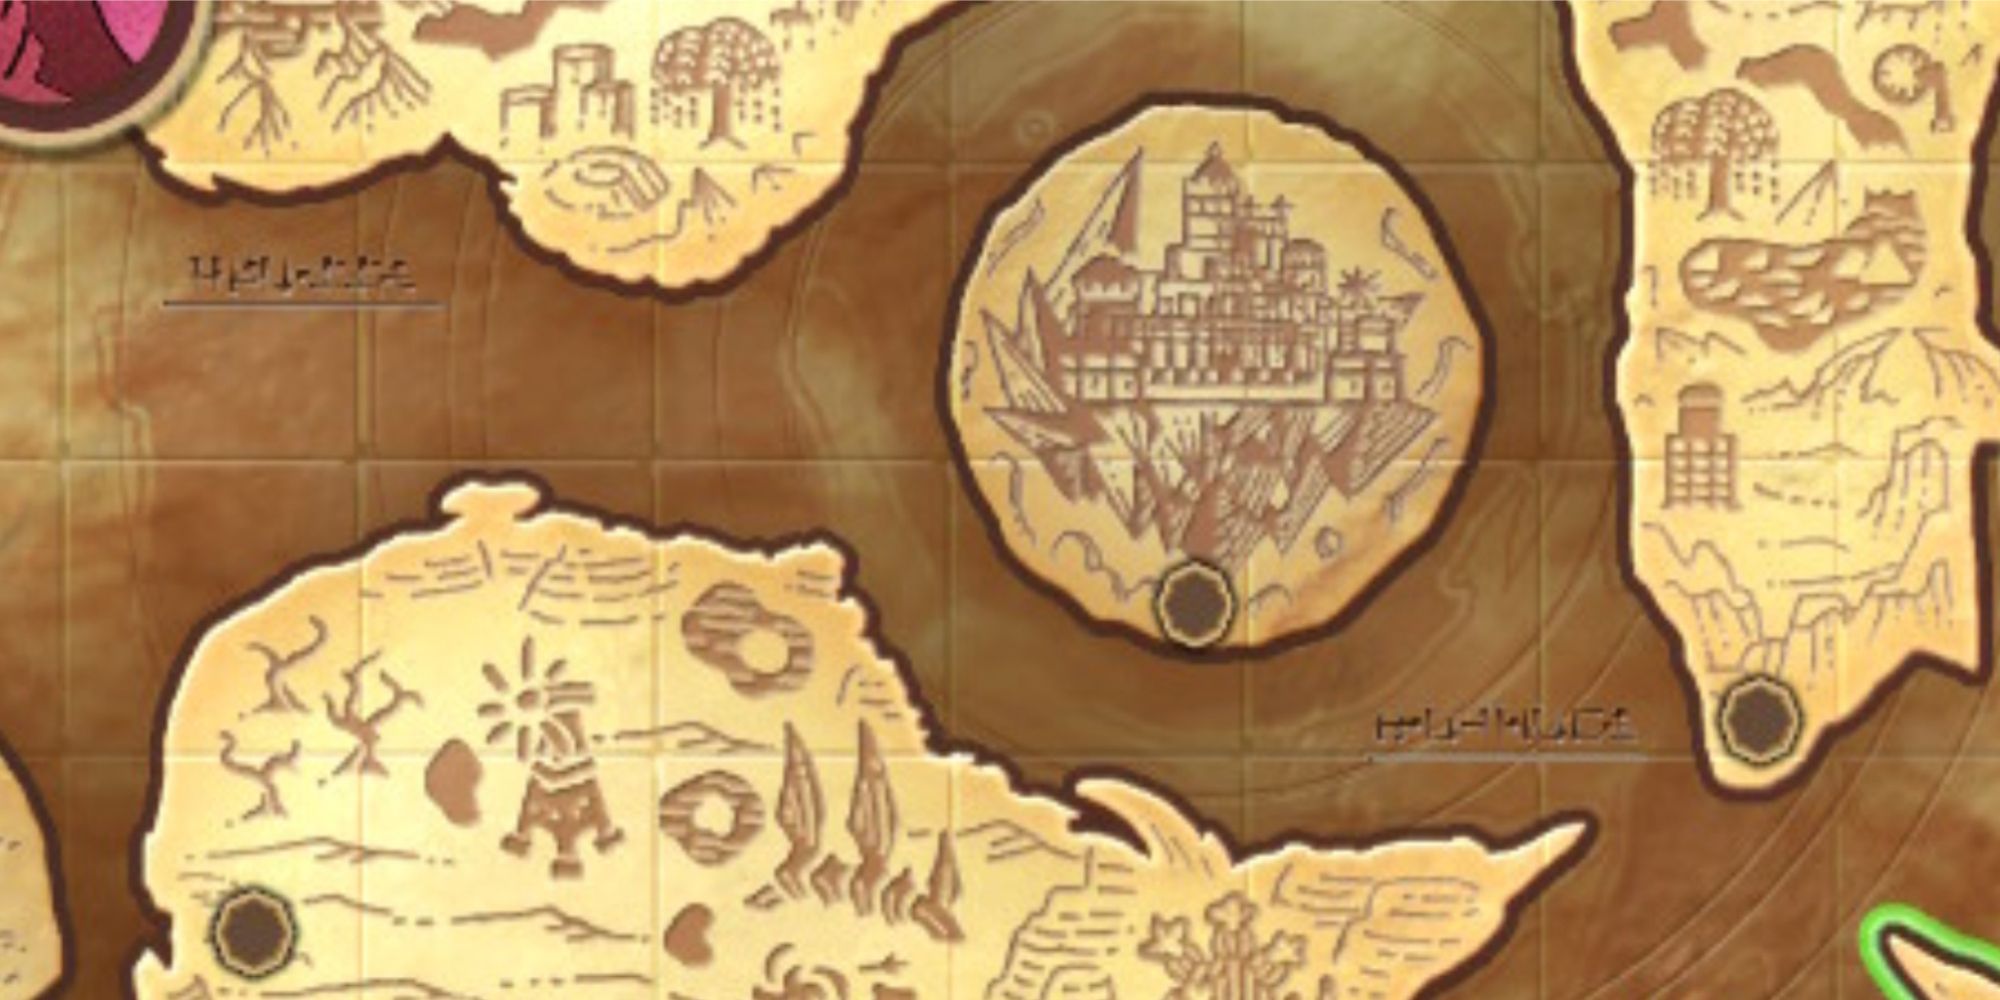 A portion of the Dragon Quest Treasures map